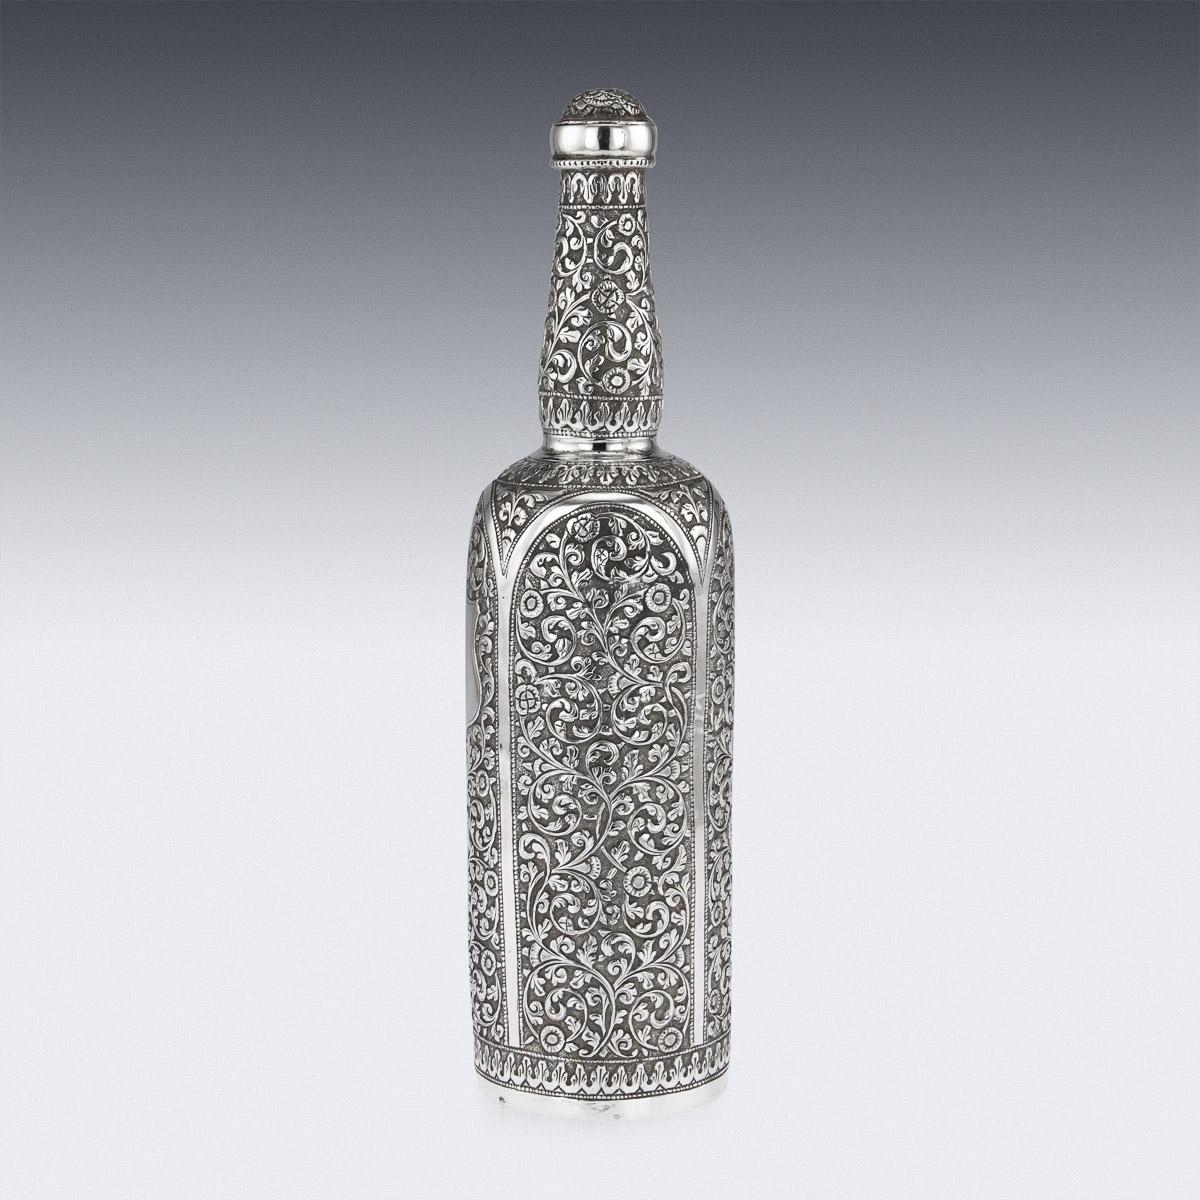 Antique late 19th century Indian Kutch (Cutch), Bhuj, Gujarat region handcrafted solid silver wine bottle with removable stopper. Of heavy gauge, decorated all over with typically Cutch chasing, distinguished by its closely worked, foliate and